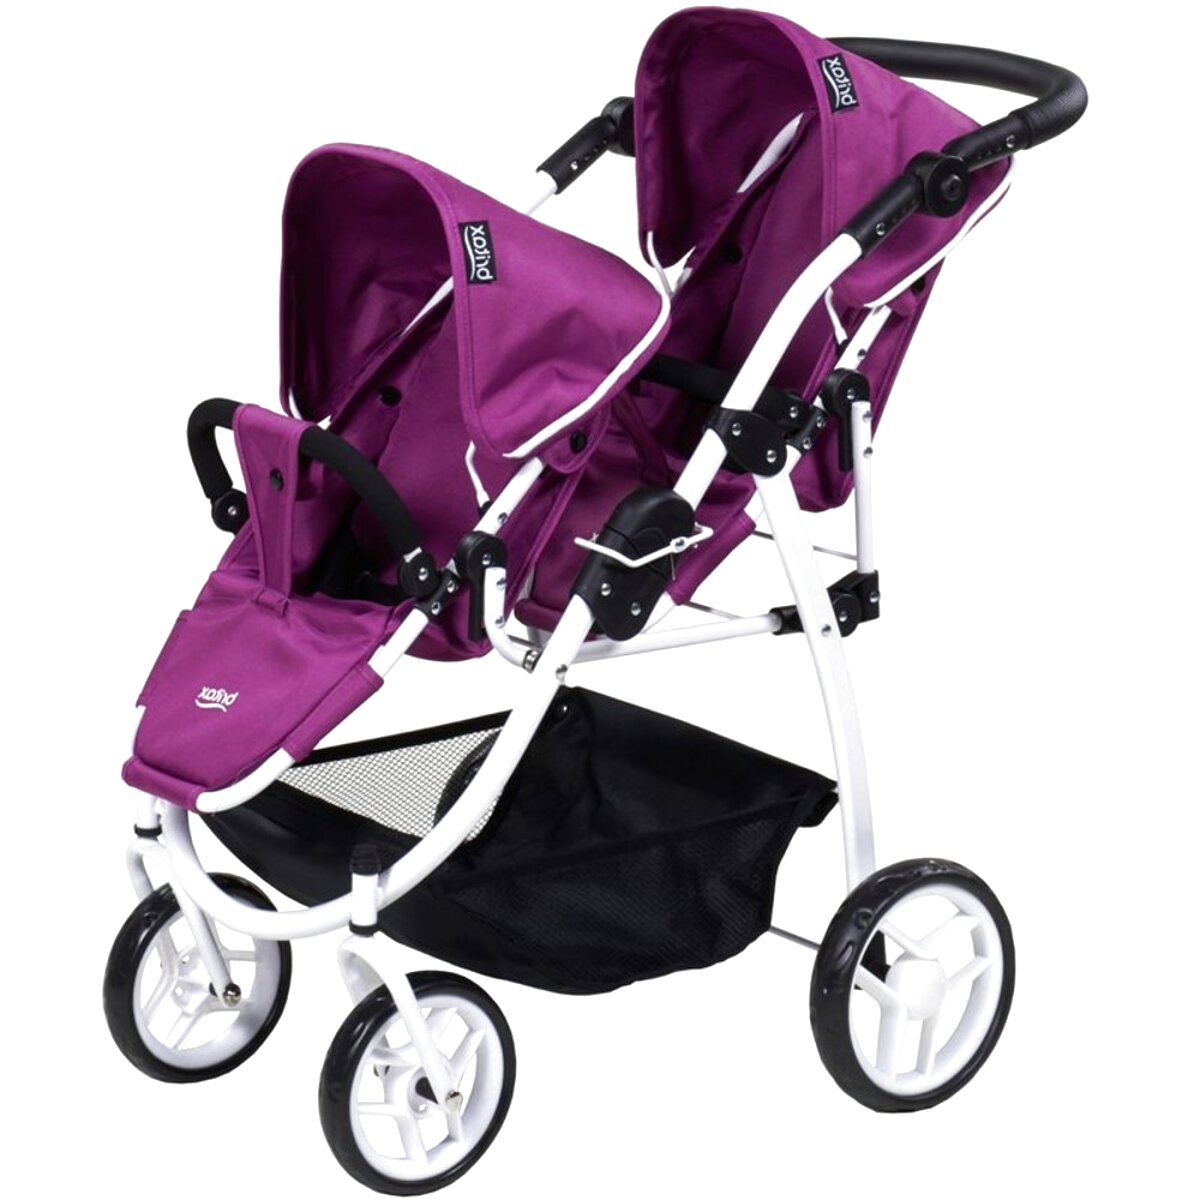 Dolls Twin Buggy for sale in UK | 45 used Dolls Twin Buggys